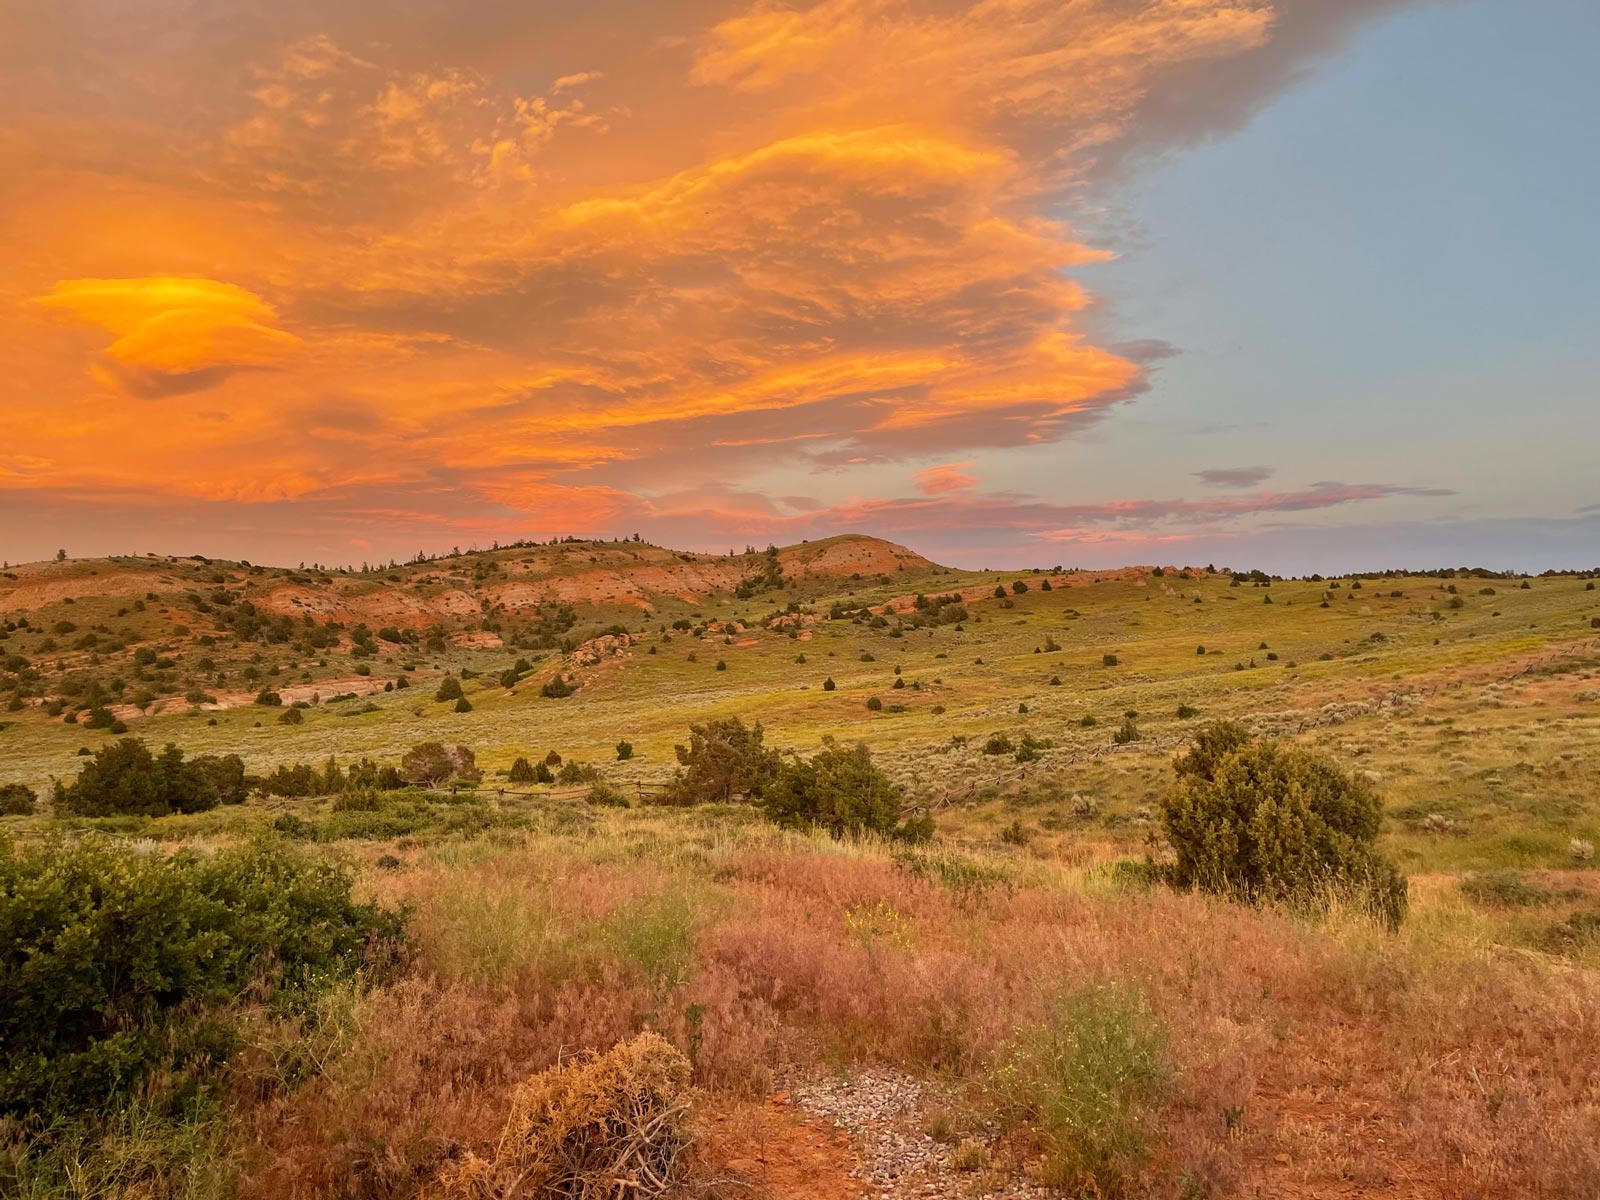 Sunset light illuminates in orange clouds over open land with a bluff